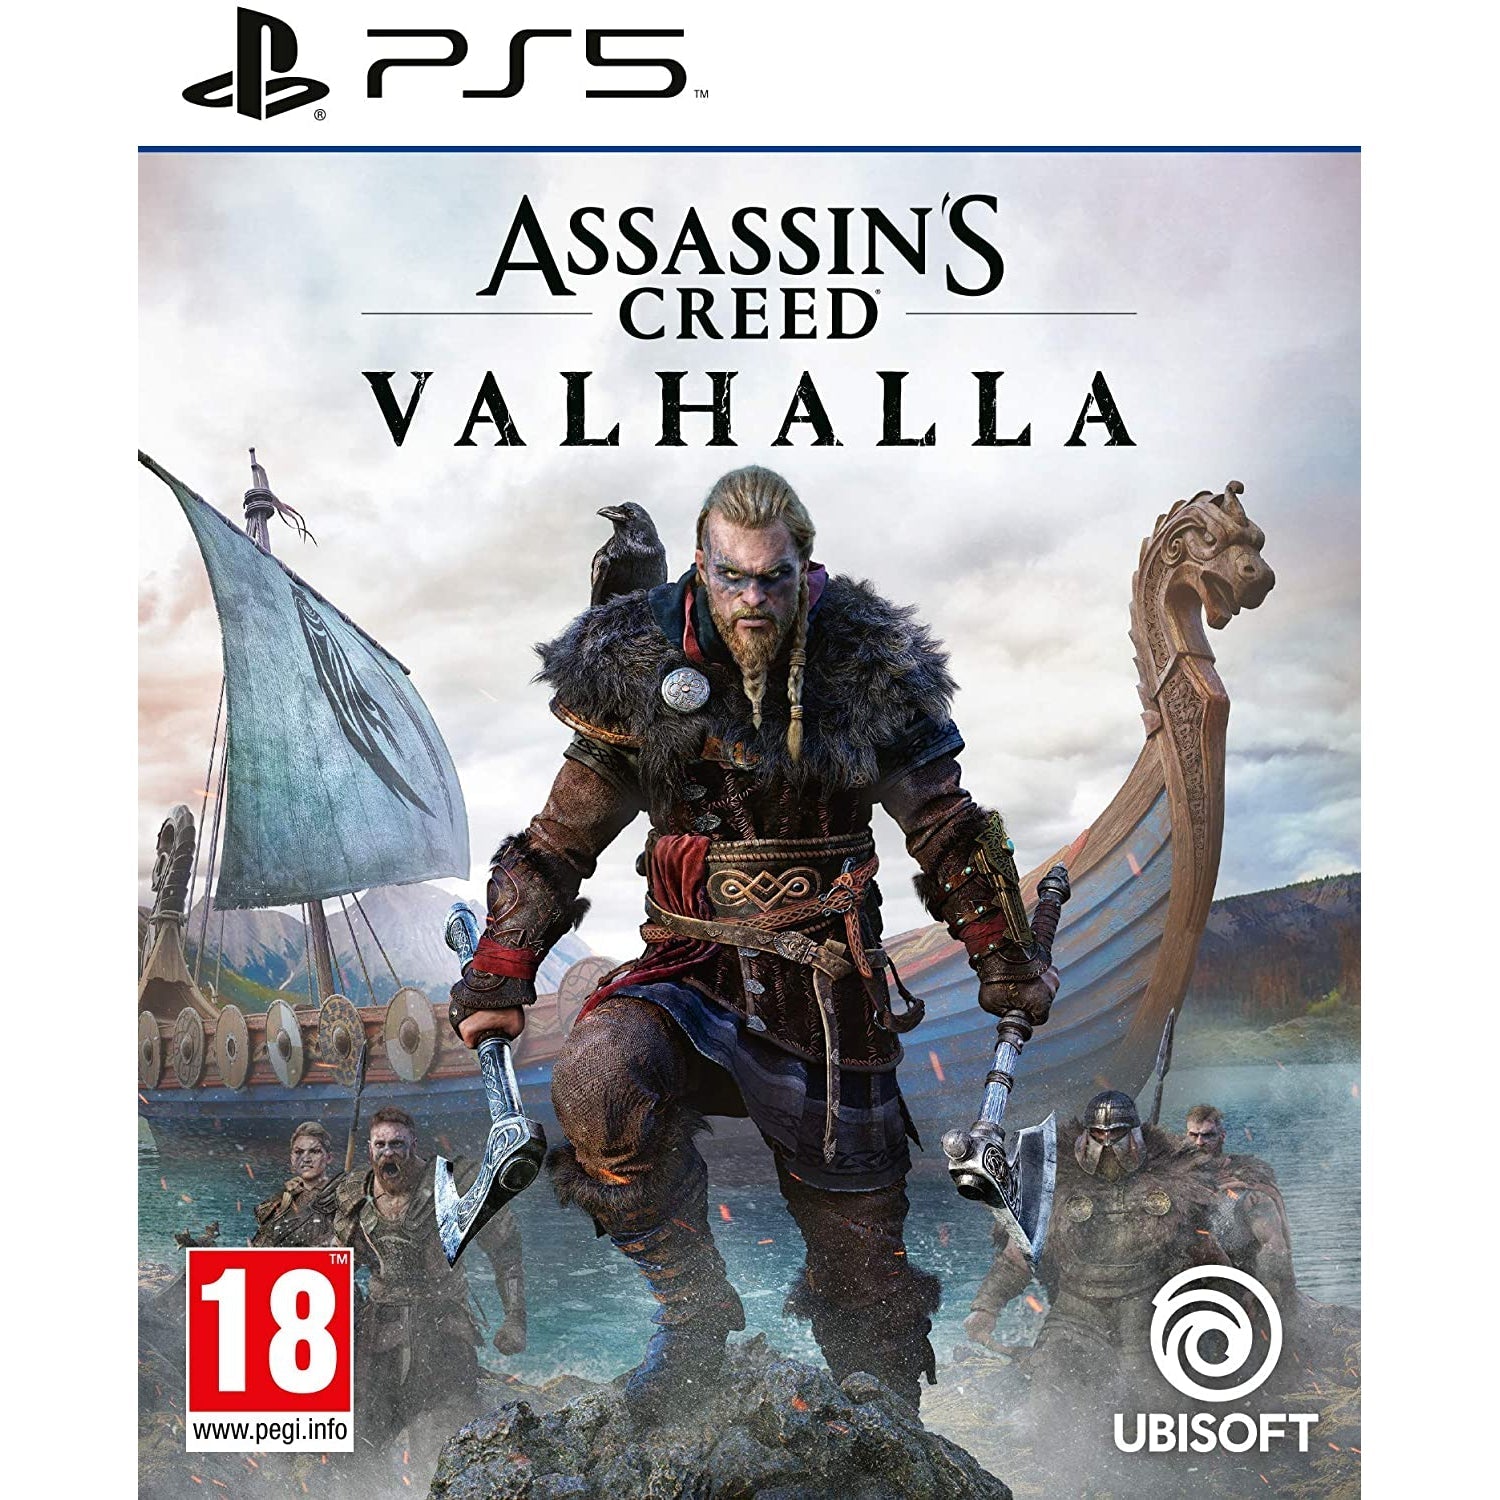 Assassin's Creed Valhalla (PS5) - New